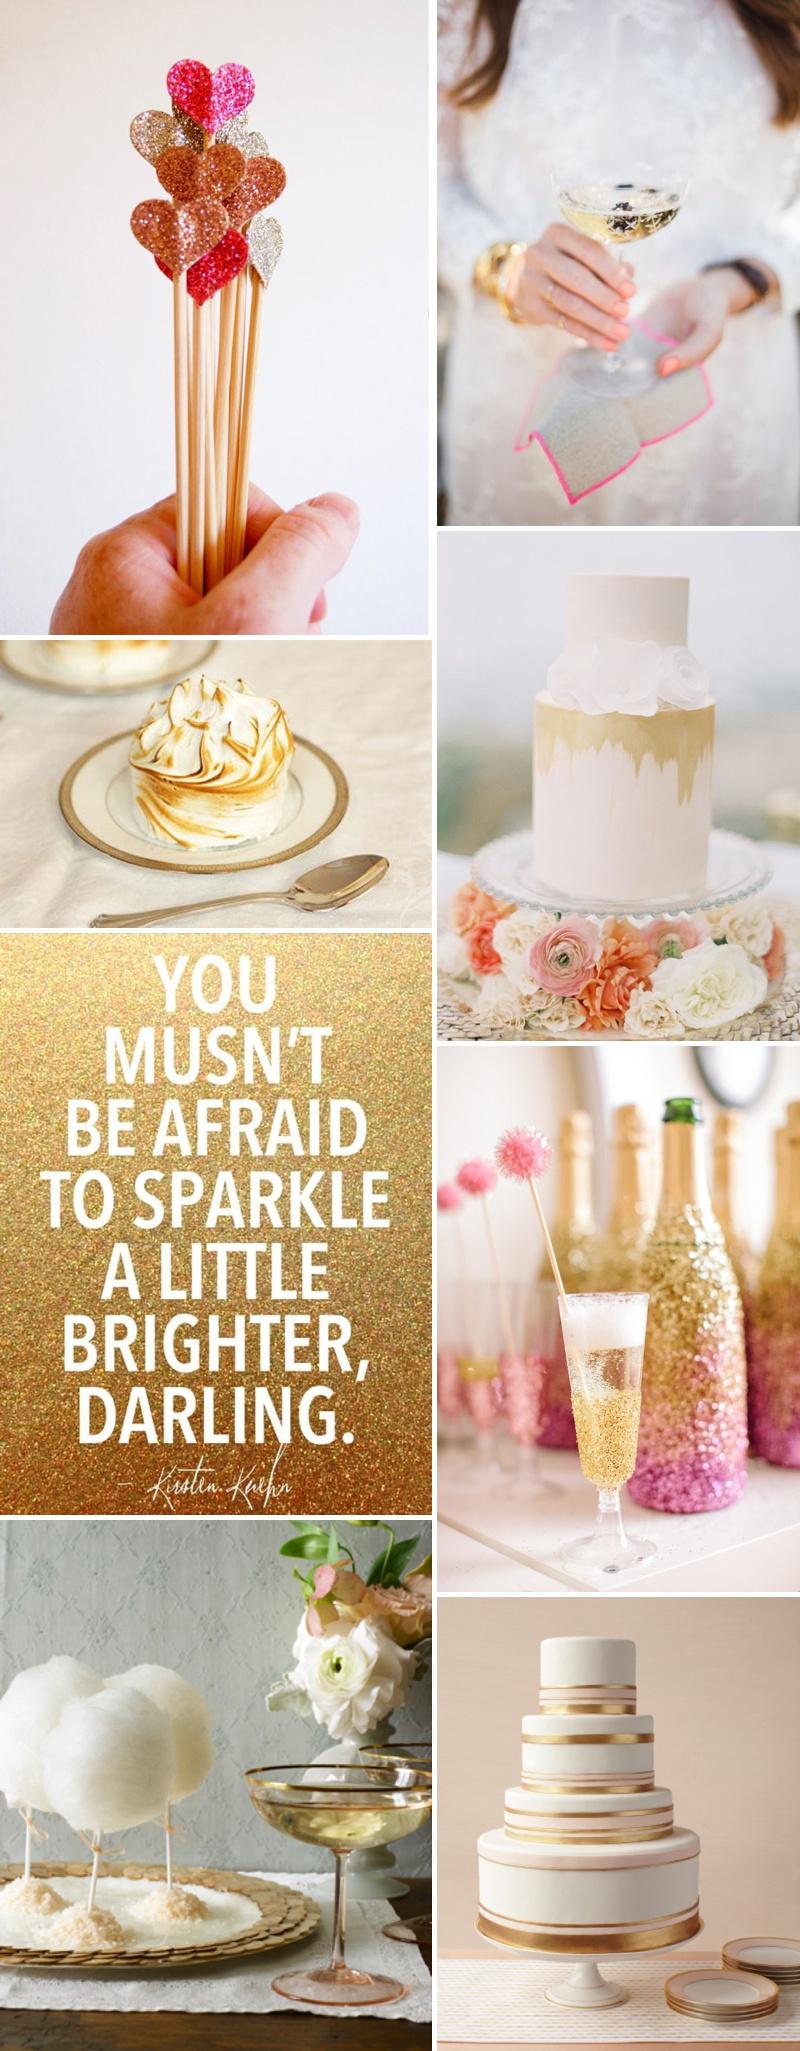 Wedding - Snippets, Whispers & Ribbons